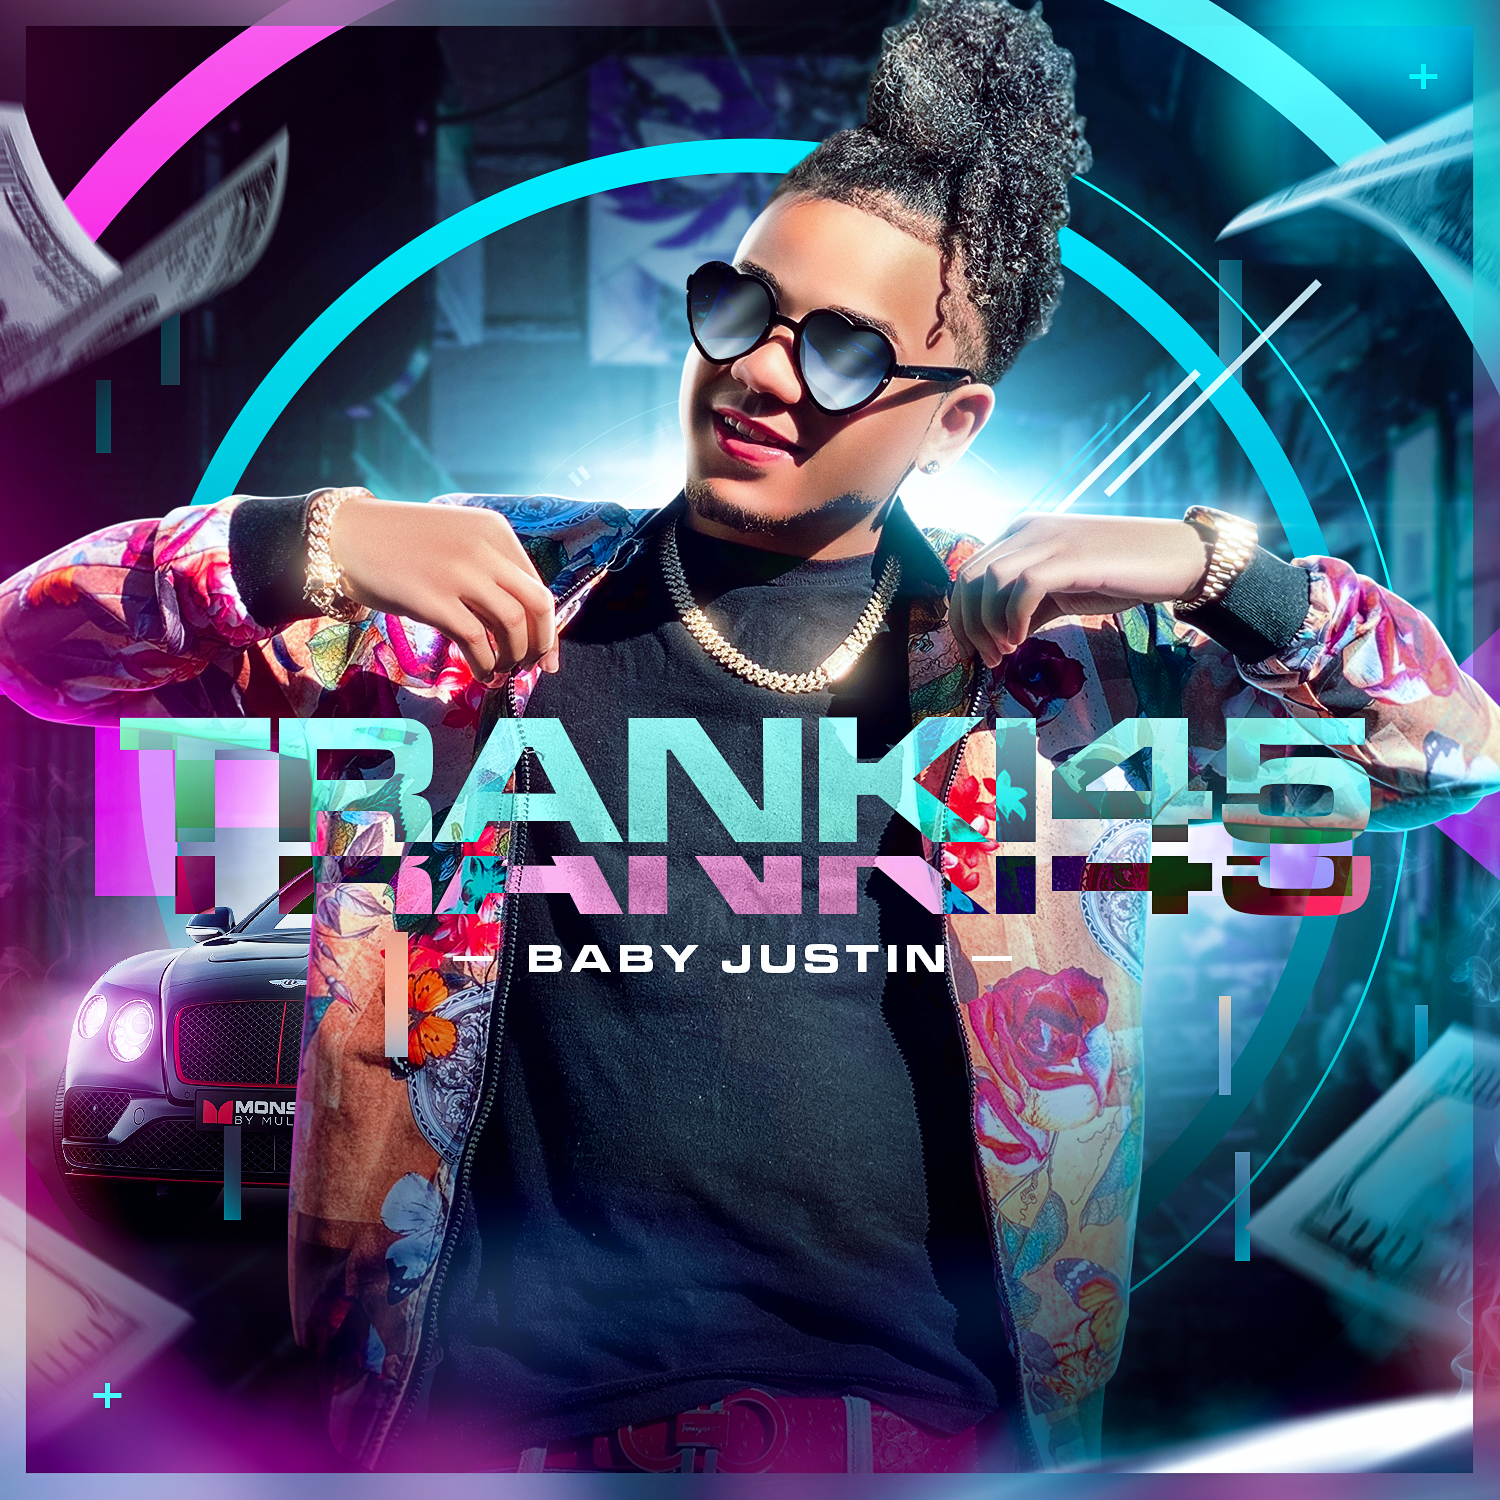  NEW RISING LATIN STAR BABY JUSTIN’S FIRST SINGLE ‘TRANKI45’  TO BE RELEASED MARCH 26TH 2021 ON SMÚSICA